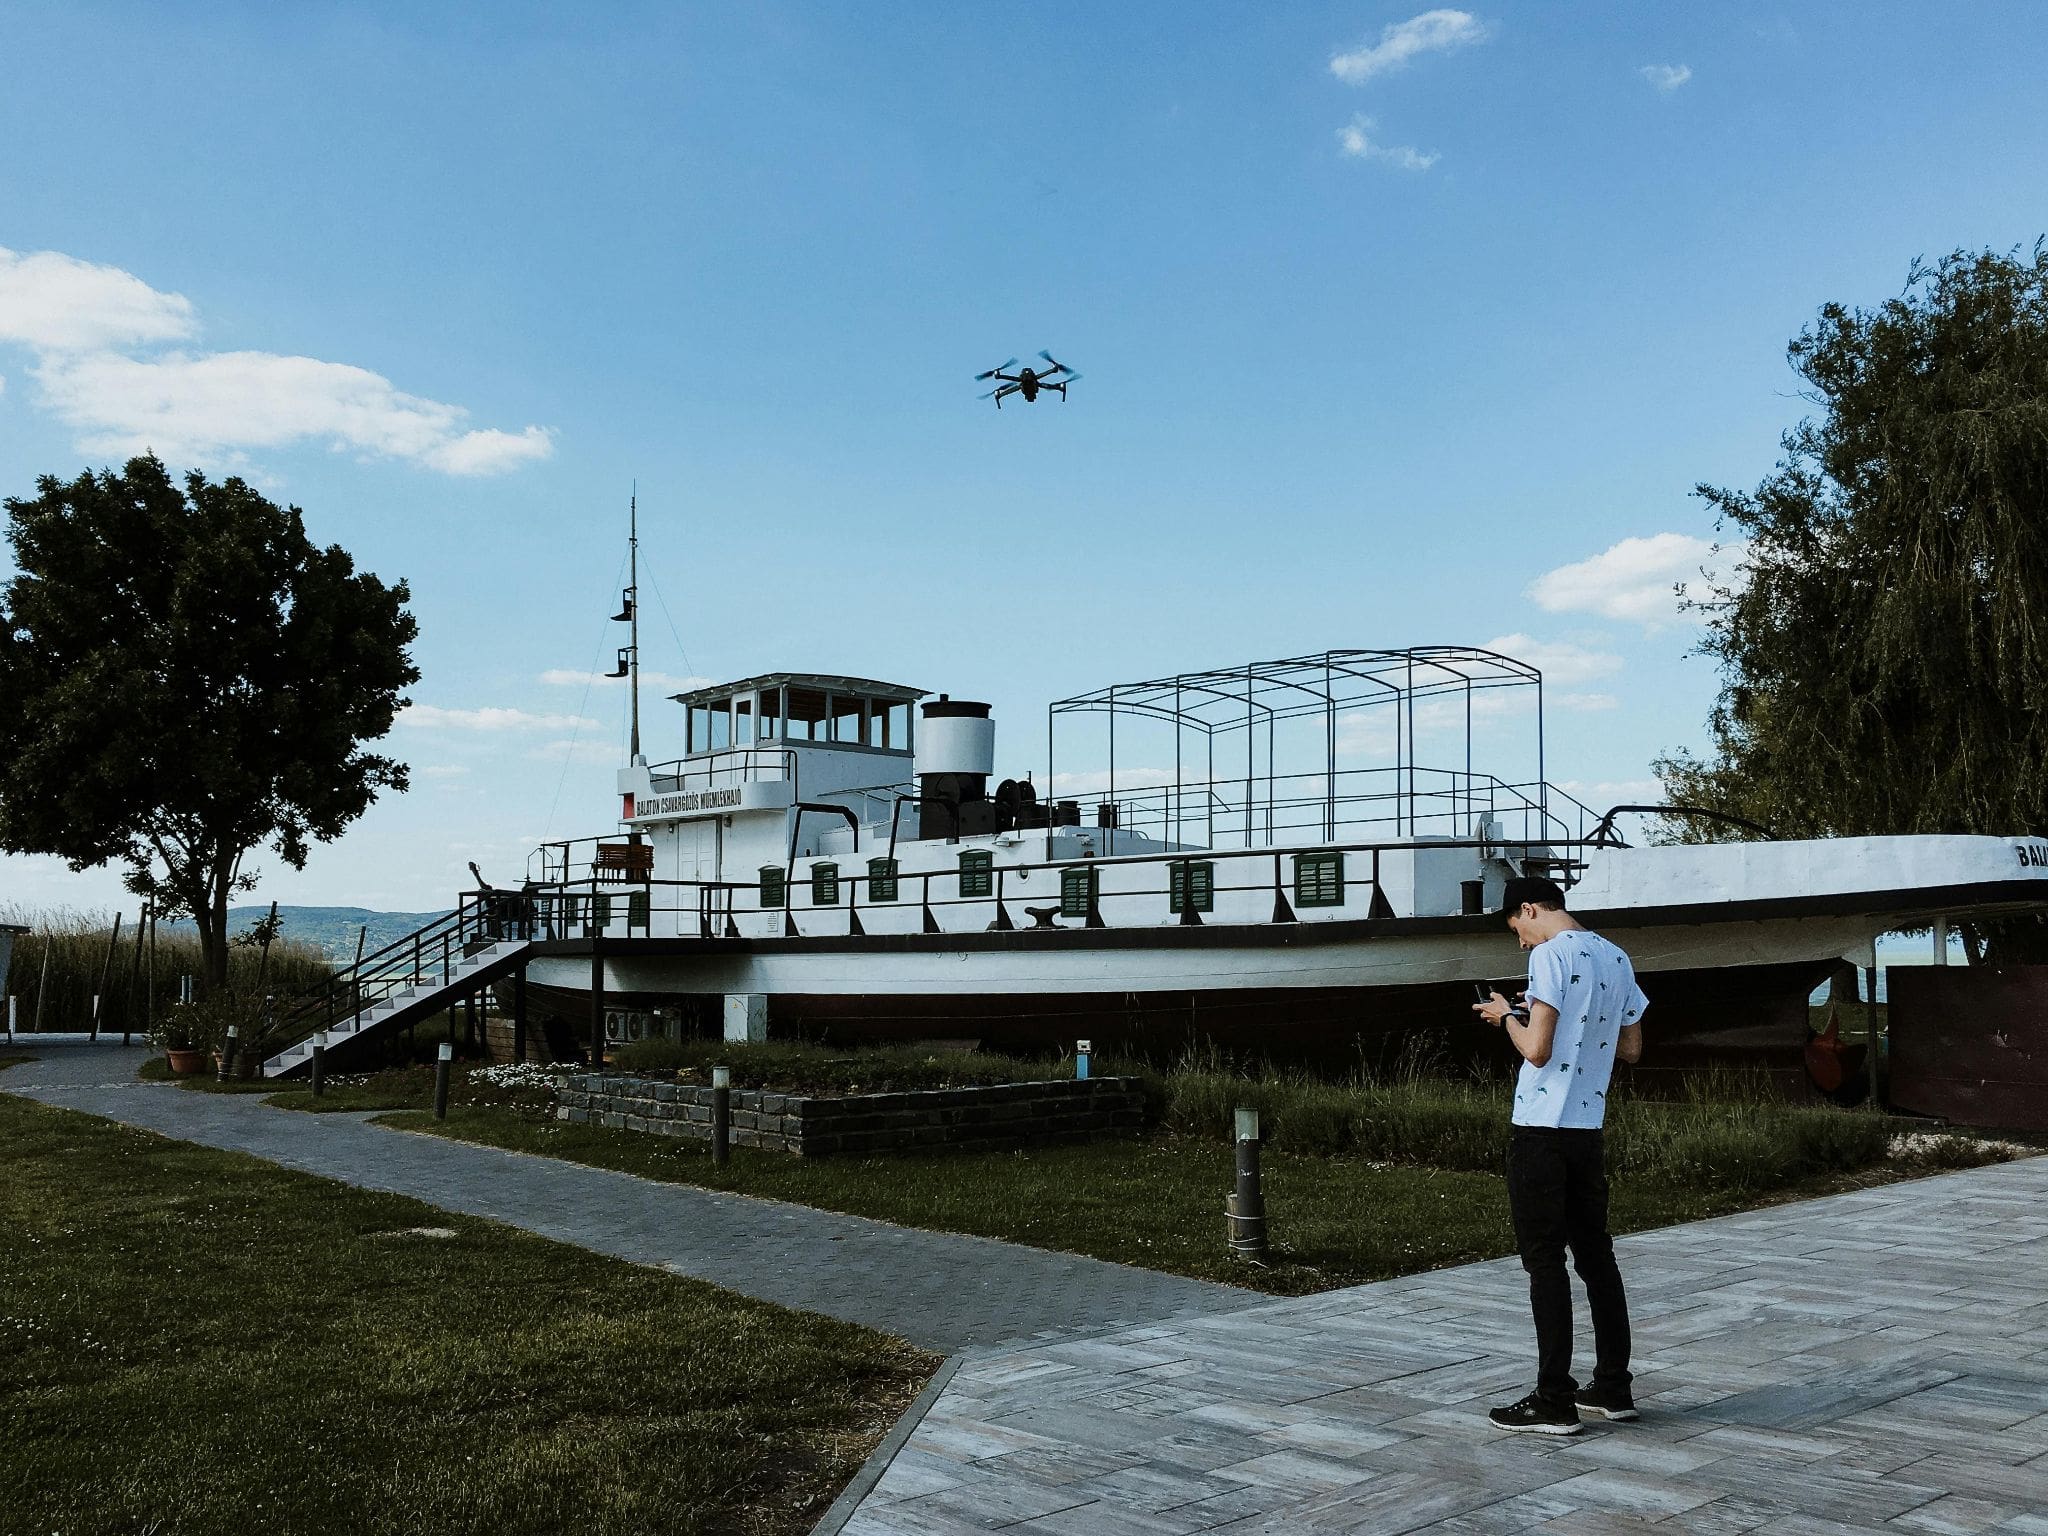 Man flying a drone in an outdoor setting